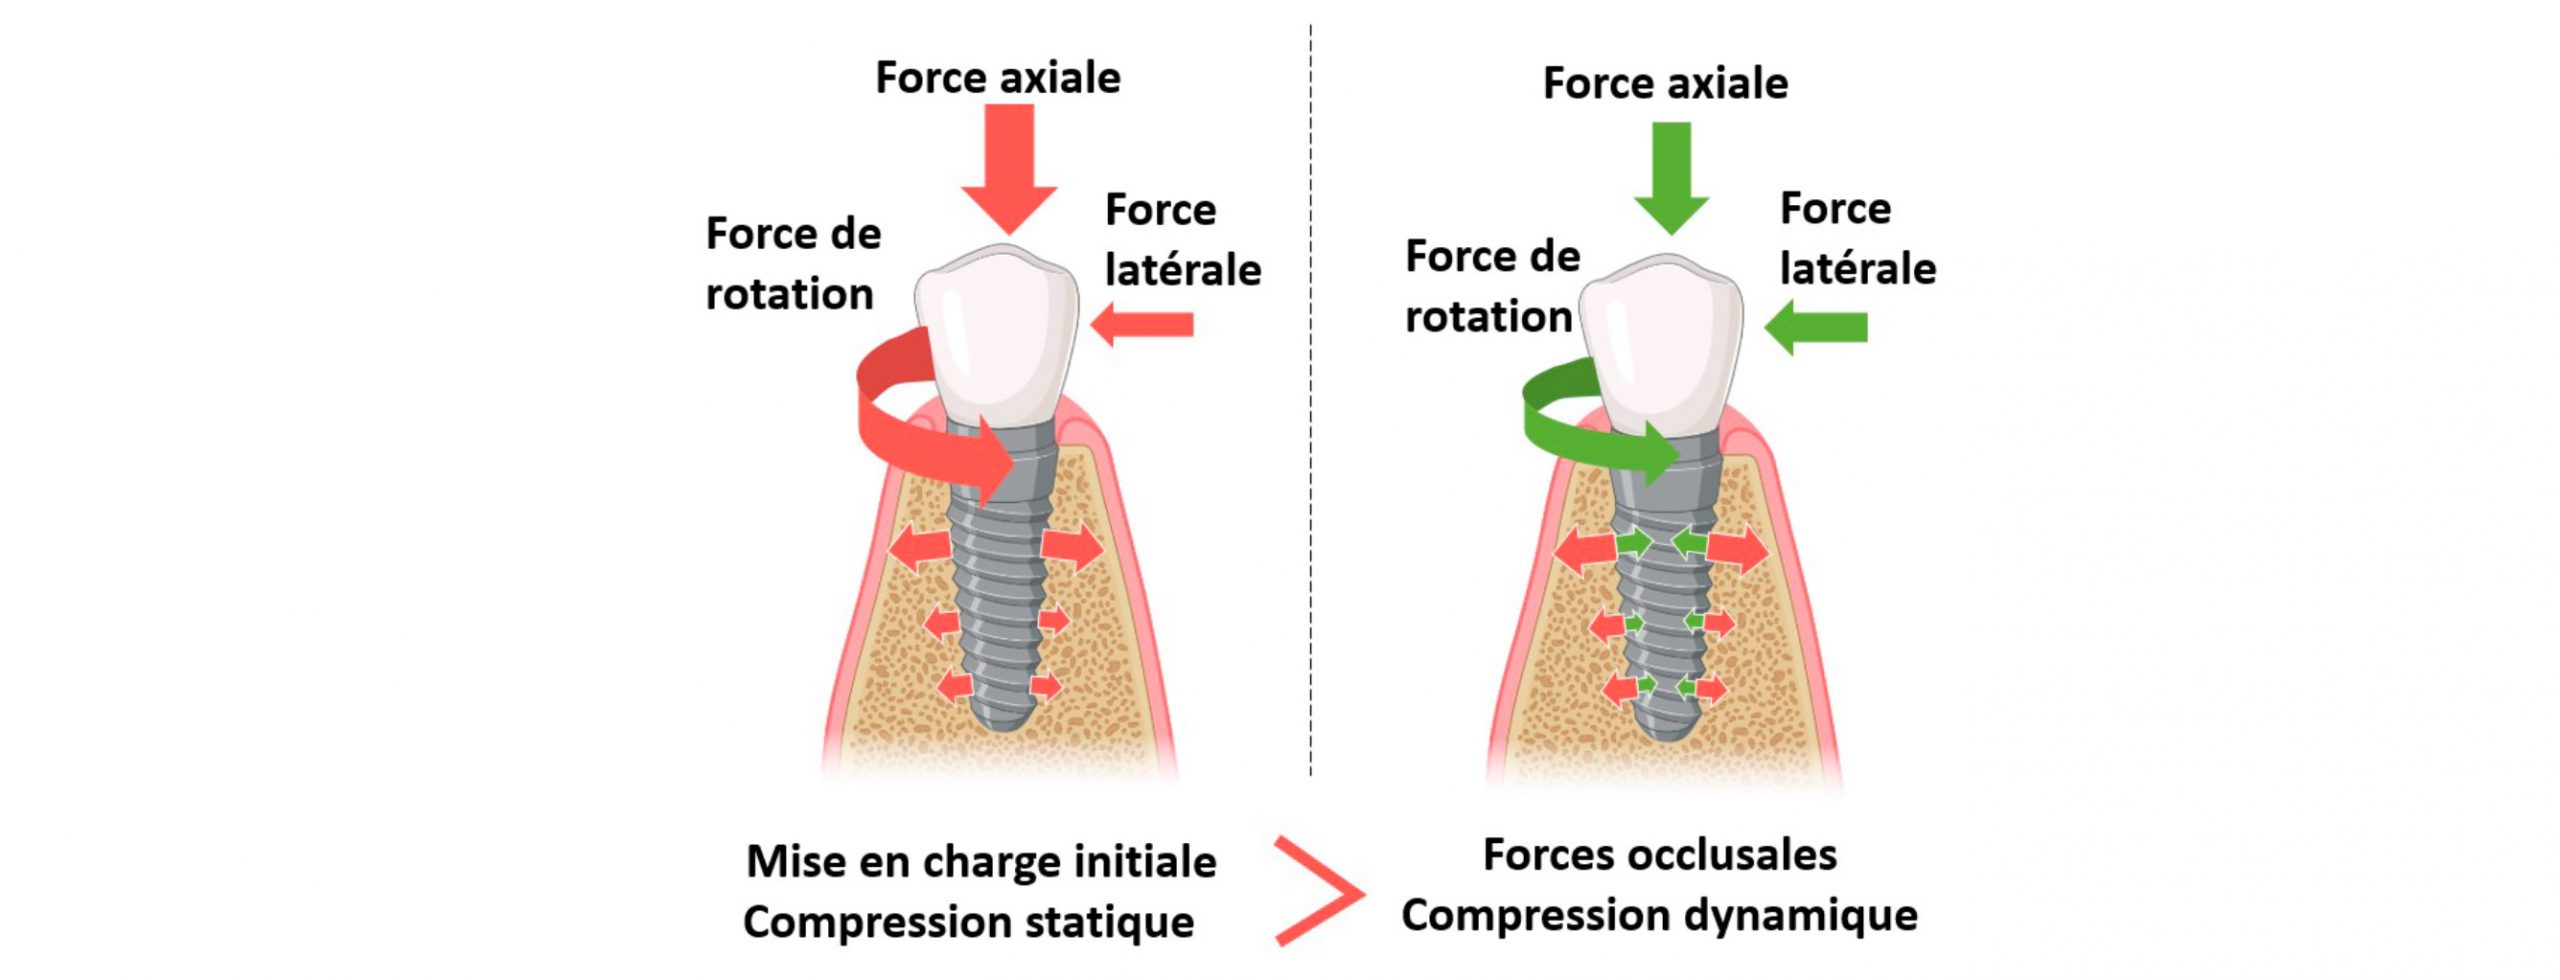 Force-axiale-stabilite-primaire